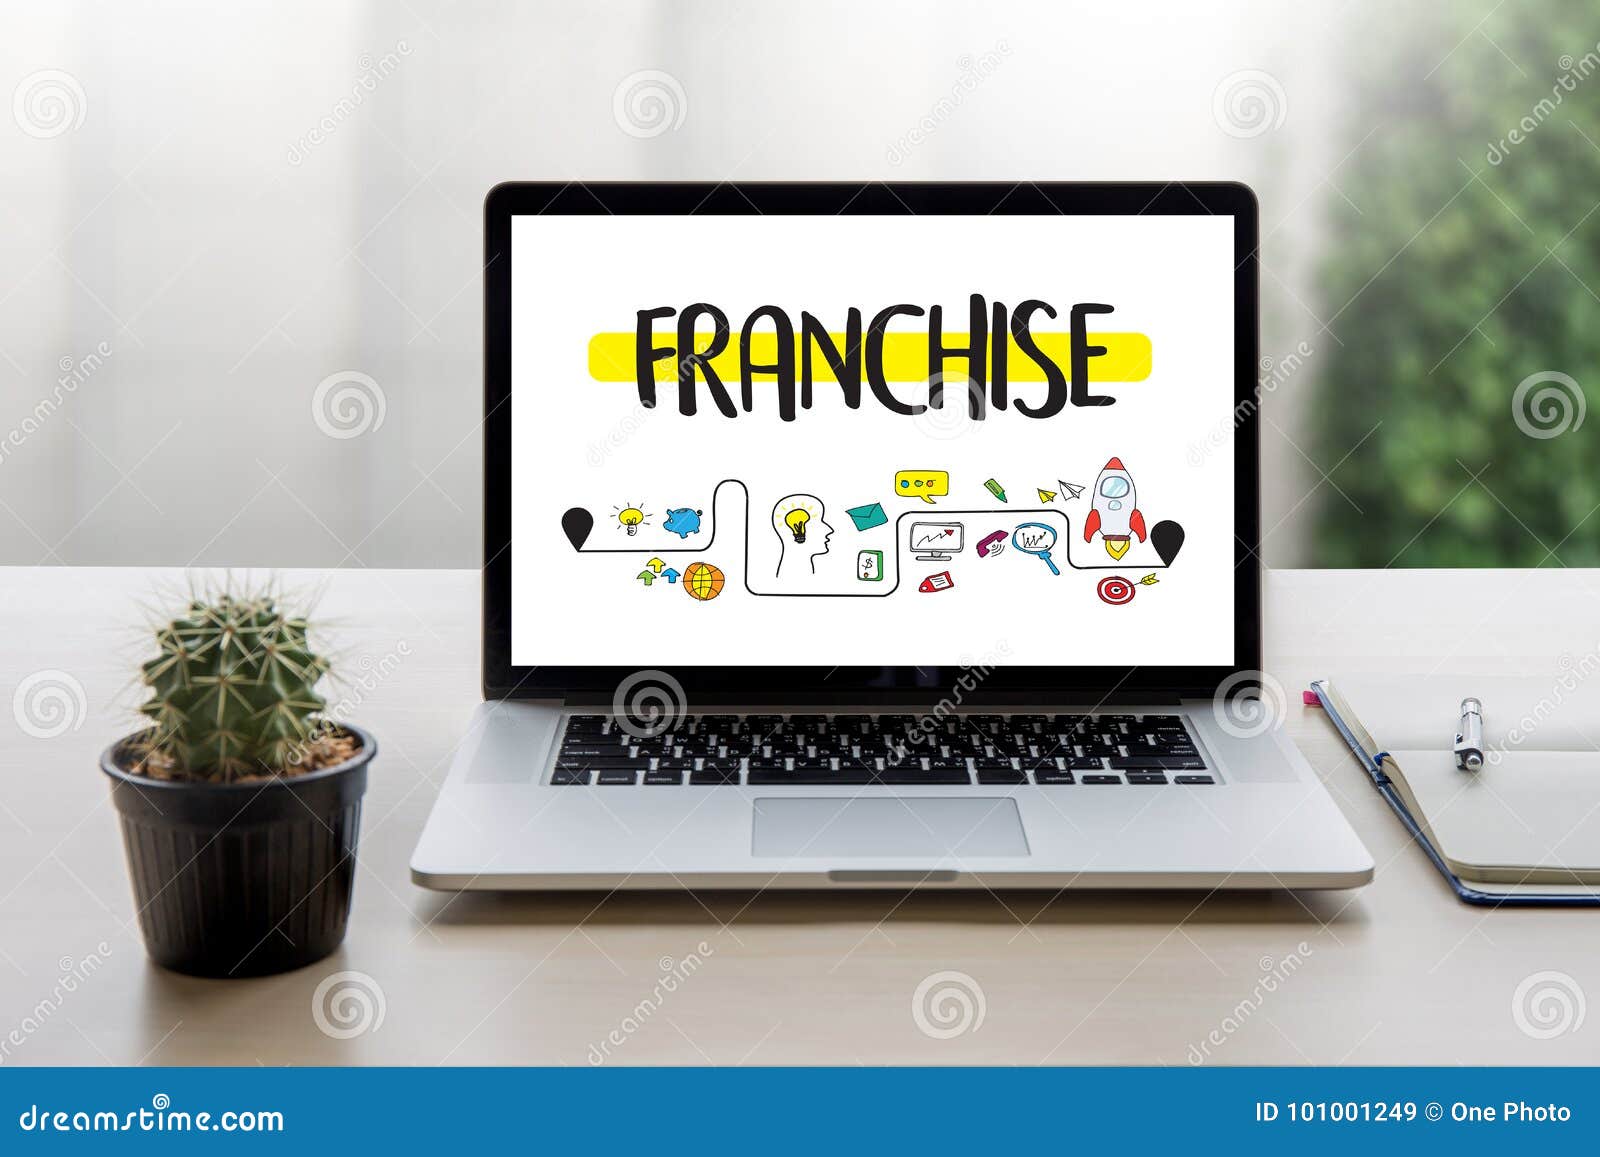 franchise marketing branding retail and business work mission c